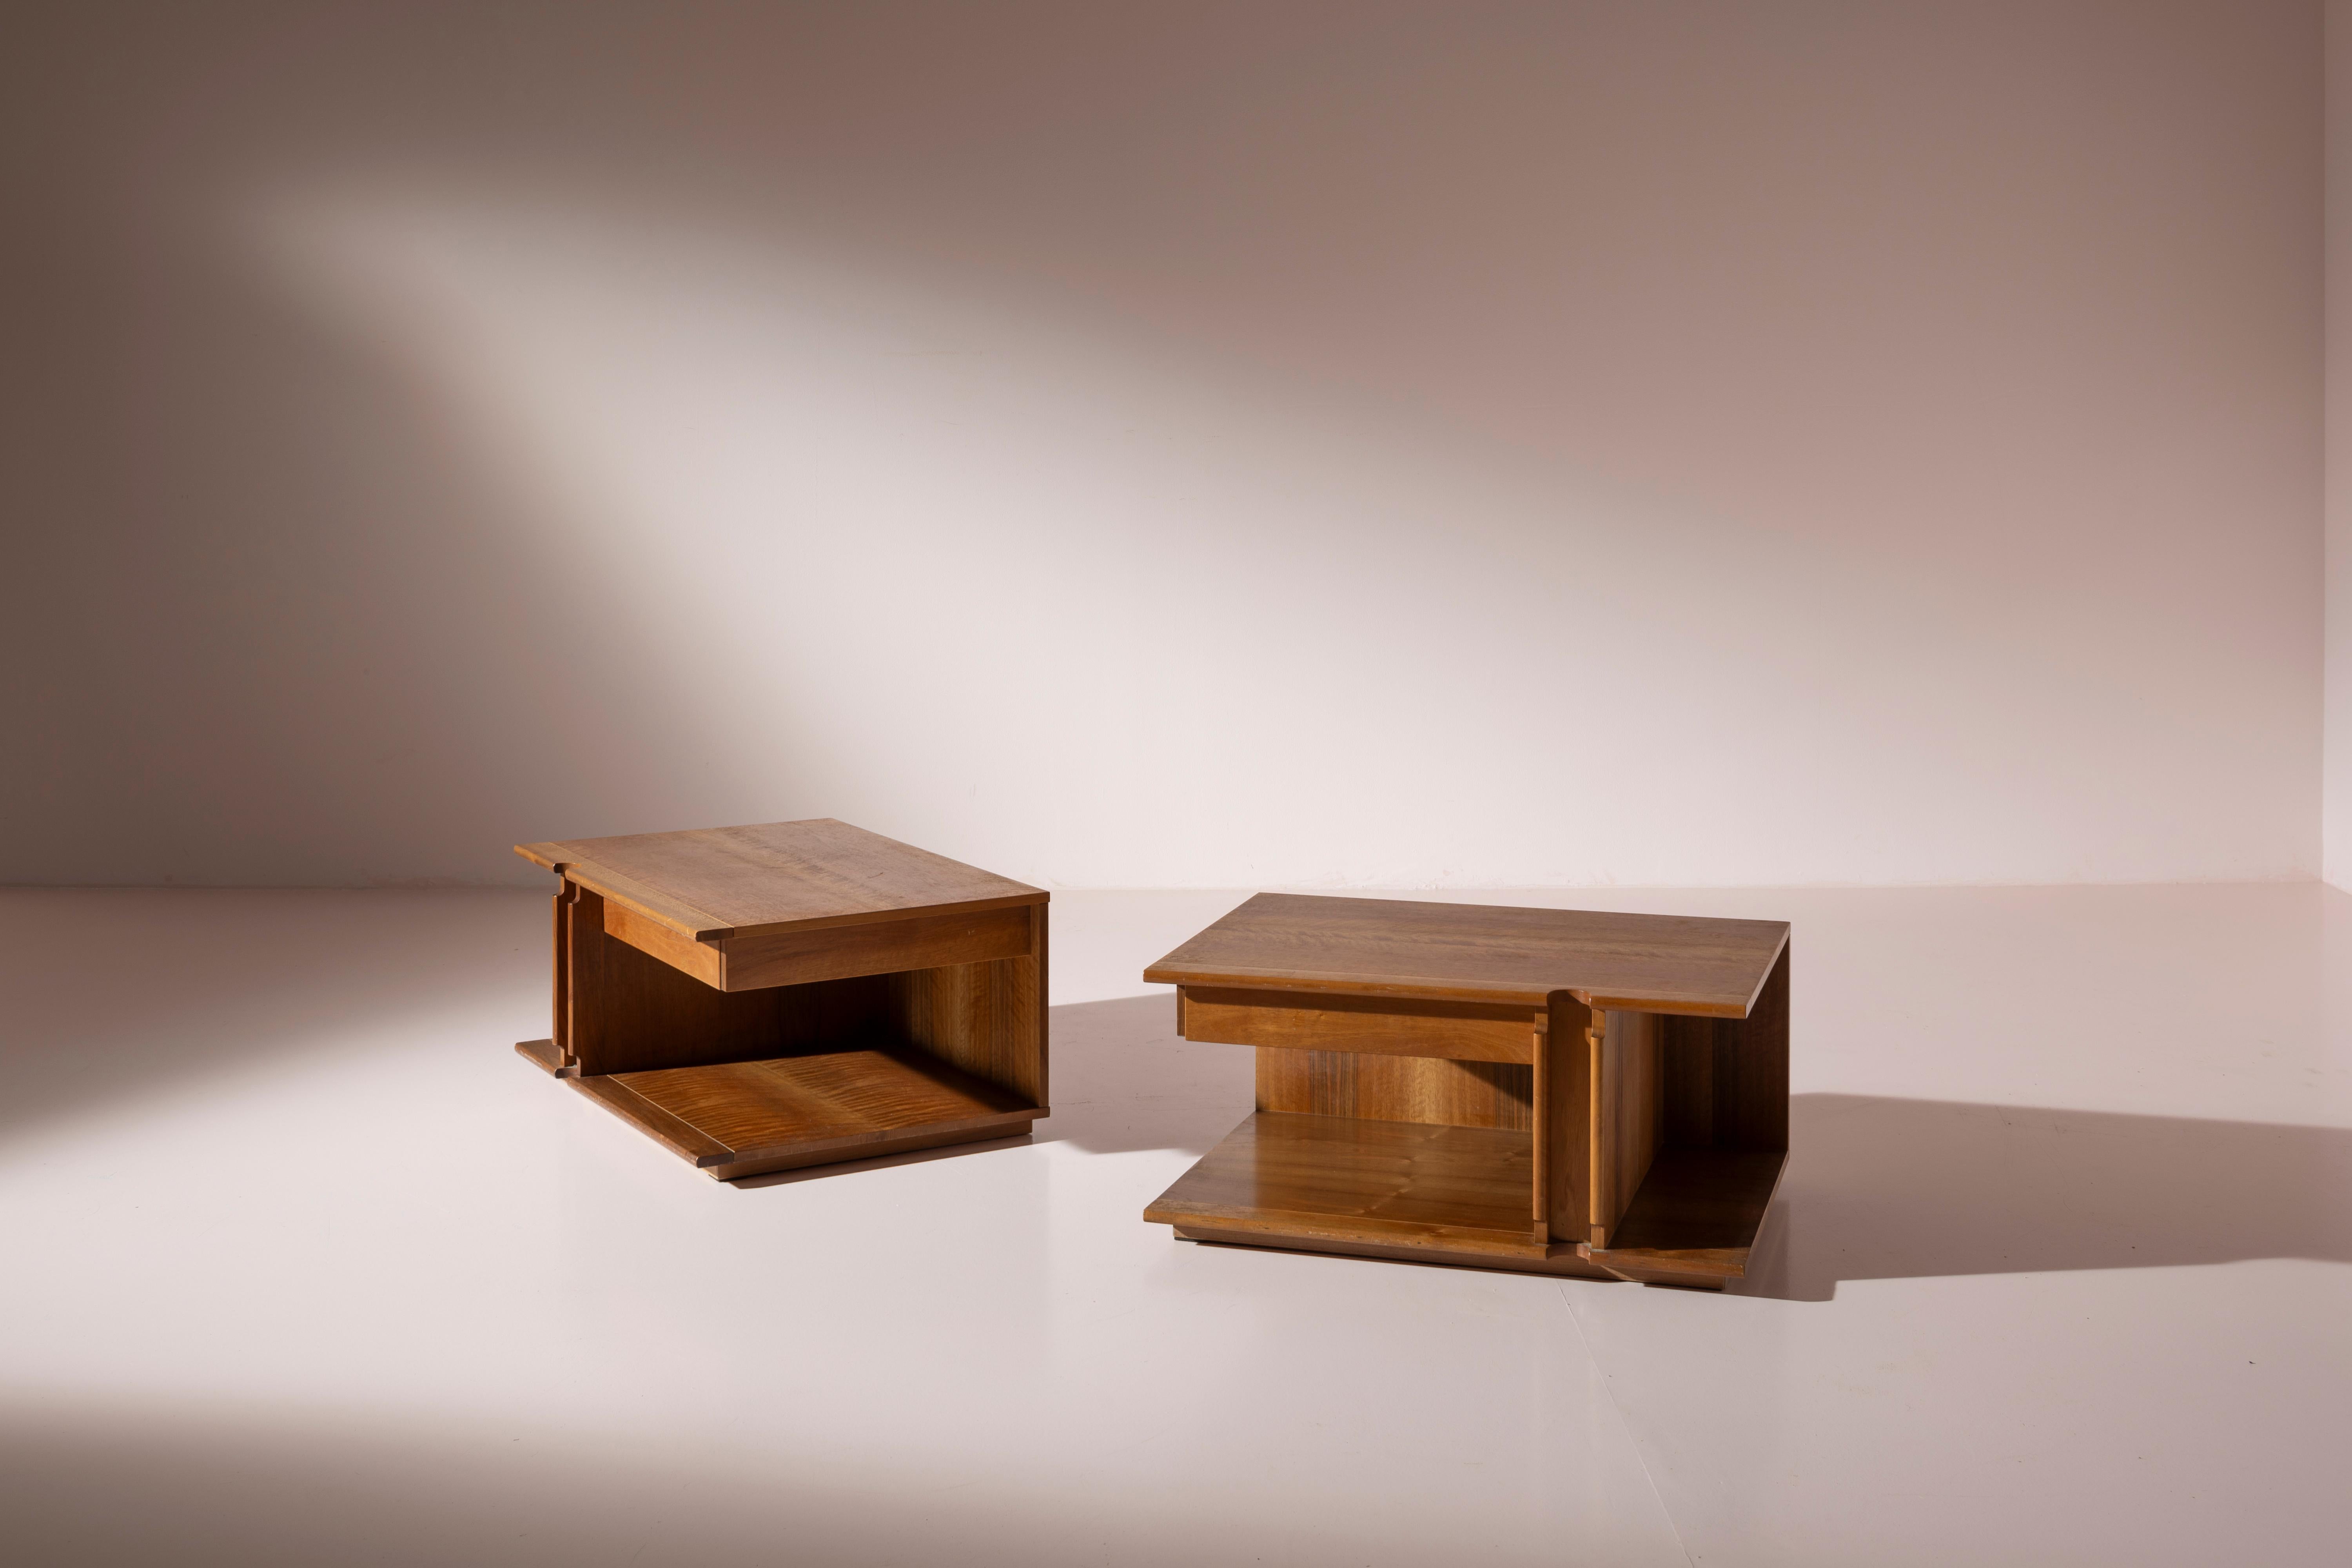 Pair of wooden nightstands, dated 1982, designed by Franco Poli, model 